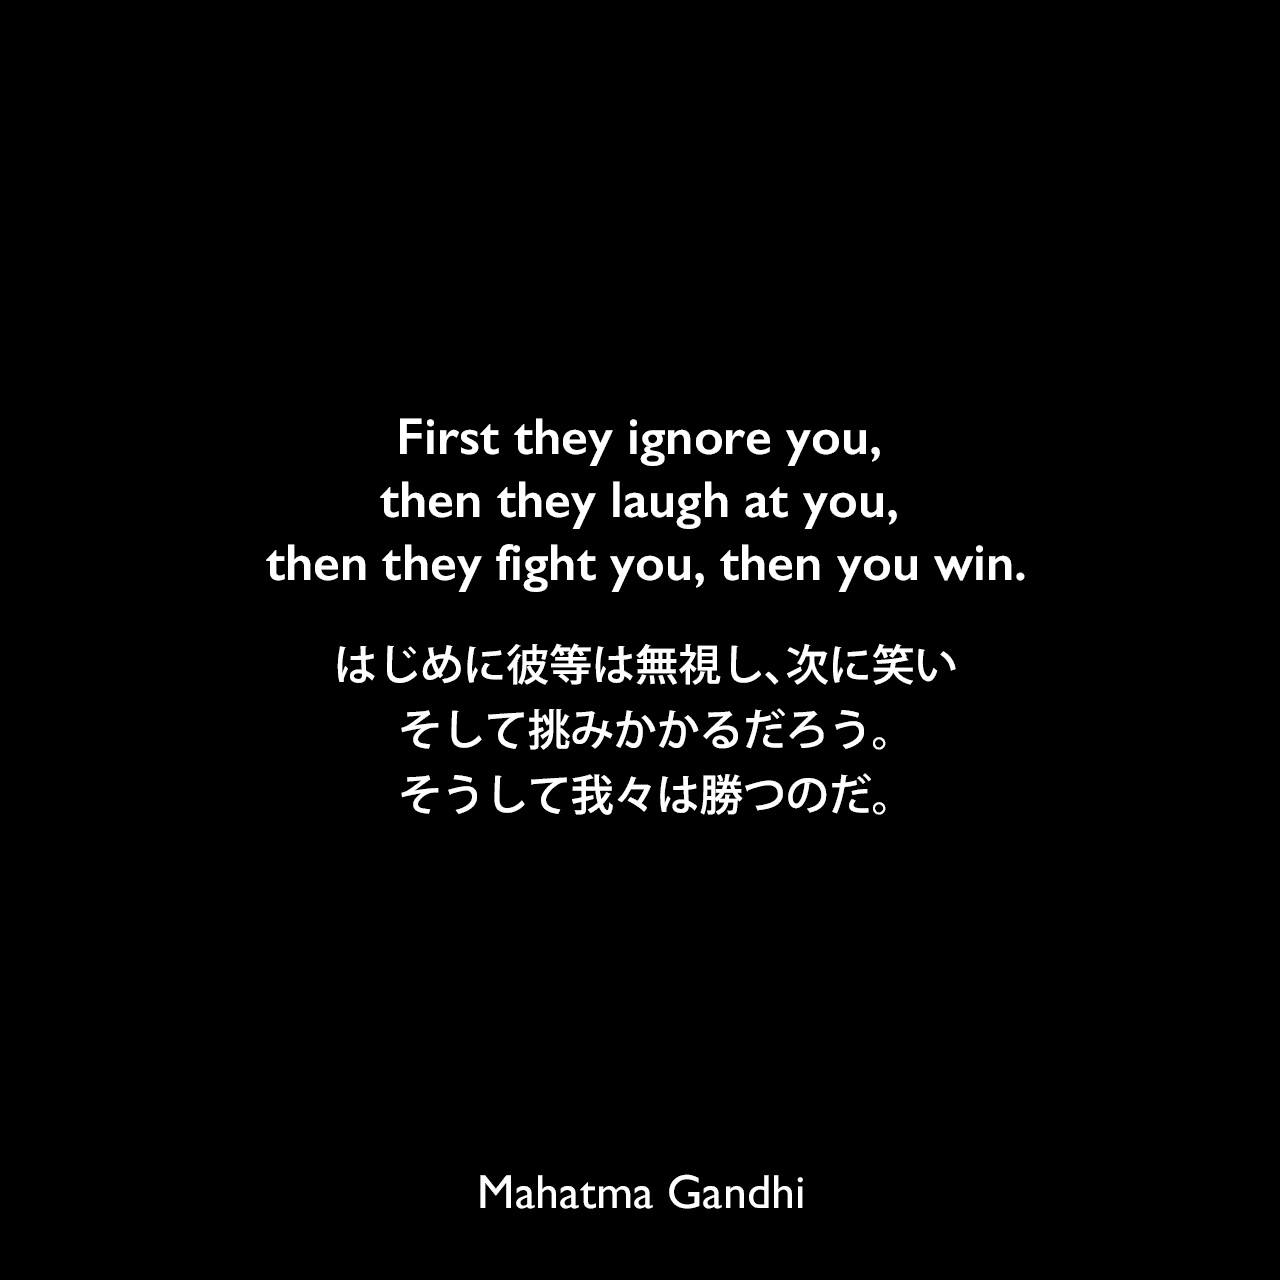 First they ignore you, then they laugh at you, then they fight you, then you win.はじめに彼等は無視し、次に笑い、そして挑みかかるだろう。そうして我々は勝つのだ。Mahatma Gandhi